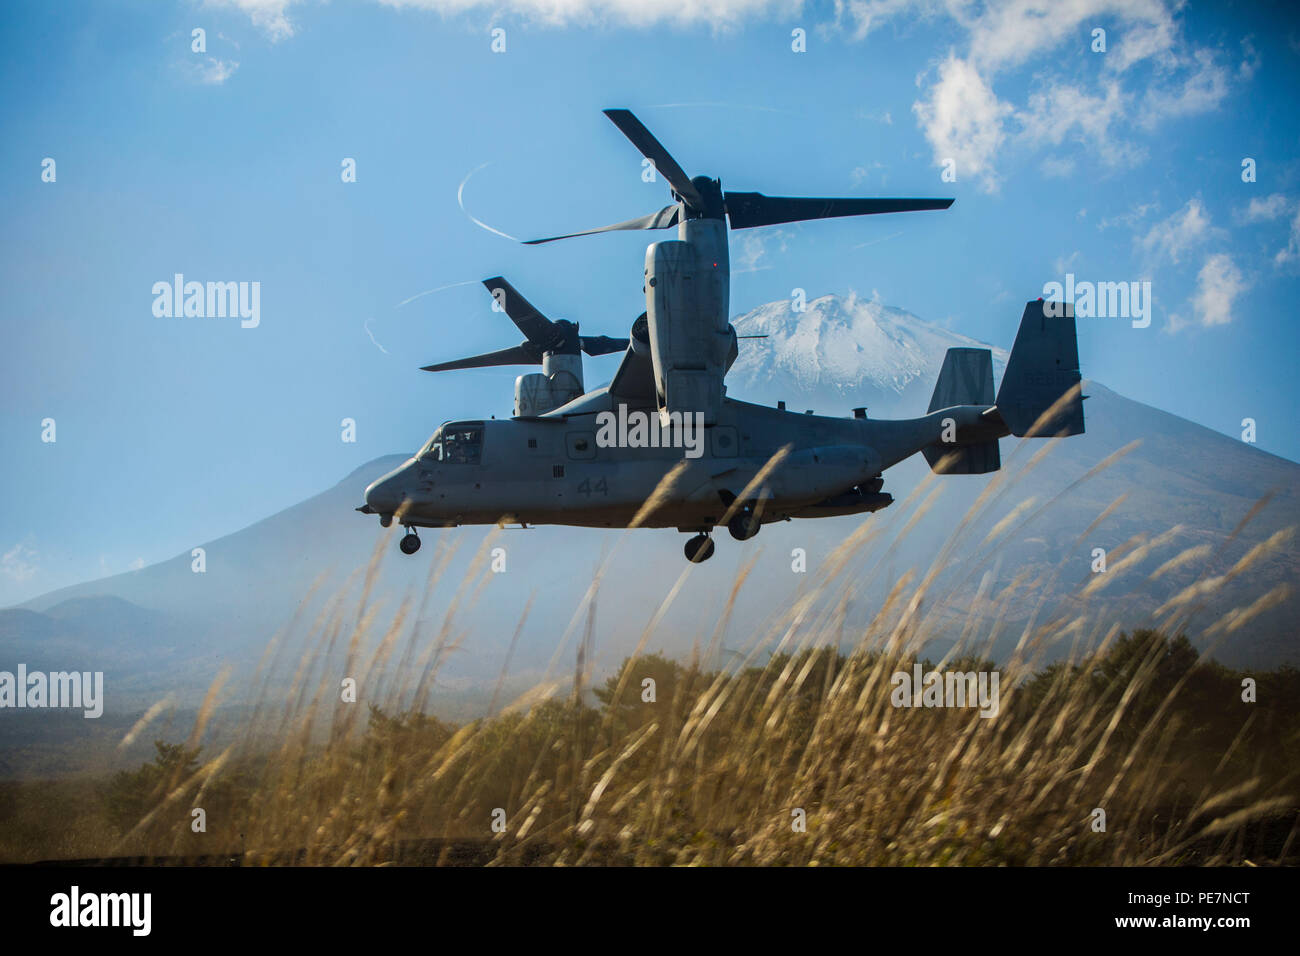 A MV-22B Osprey and its crew conduct mountain area training at Mt. Fuji, Japan, Oct. 9, 2015. The training prepared the pilots and crew for the rigors of operating the aircraft at high elevations. “The aircraft operates with less power and takes longer to slow down at high elevation, so this boosts our performance,” said Capt. Piotr K. Stapor, an Osprey pilot from Lawrenceville, Georgia. The Osprey and crew are with Marine Medium Tiltrotor Squadron 262, Marine Aircraft Group 36, 1st Marine Aircraft Wing, III Marine Expeditionary Force. (U.S. Marine Corps Photo by Cpl. Tyler S. Giguere/Released Stock Photo